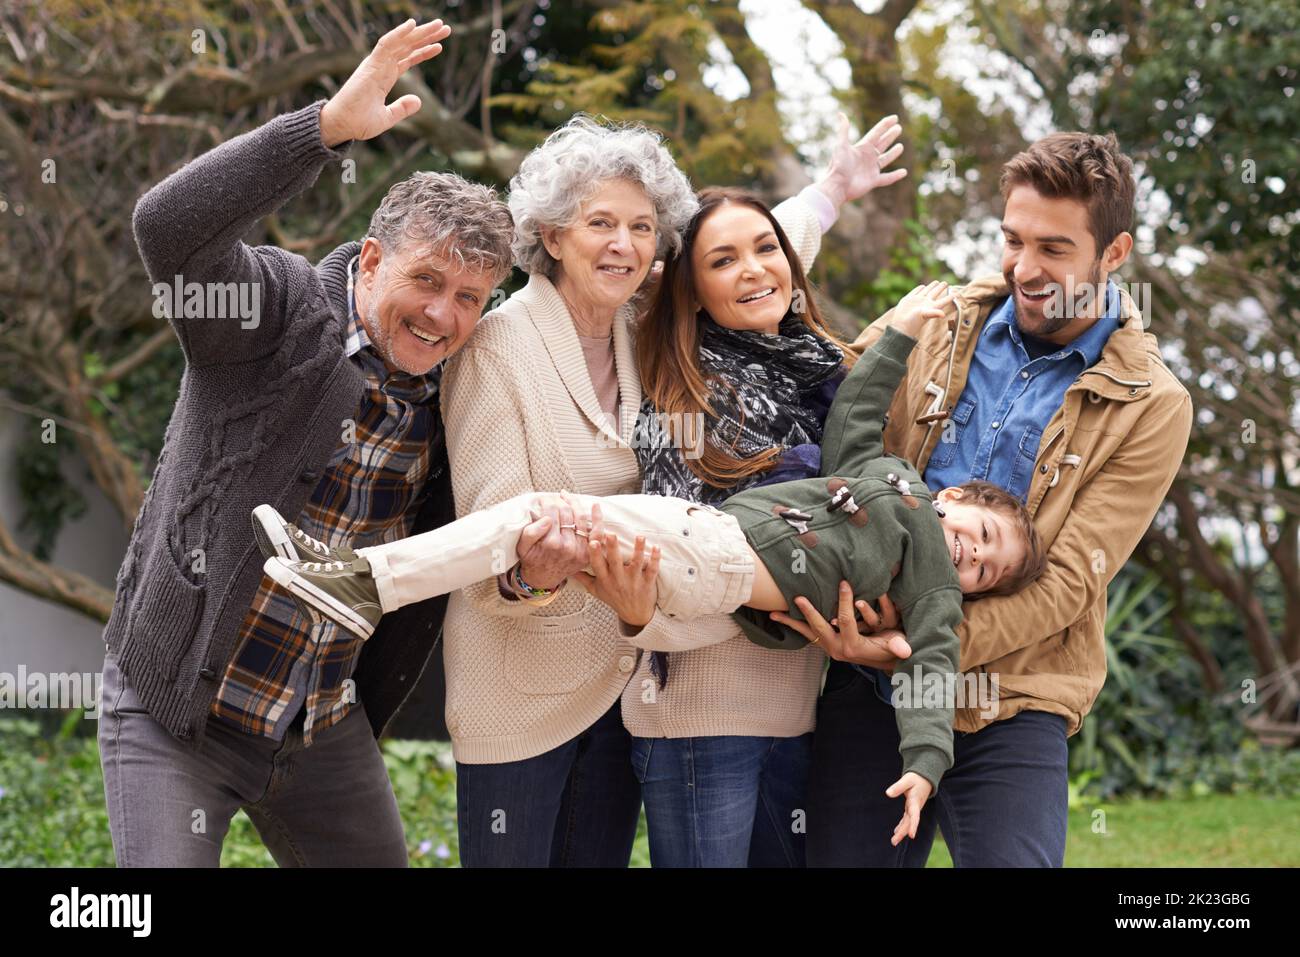 Family over everything. Portrait of a happy multi-generation family having fun outdoors. Stock Photo